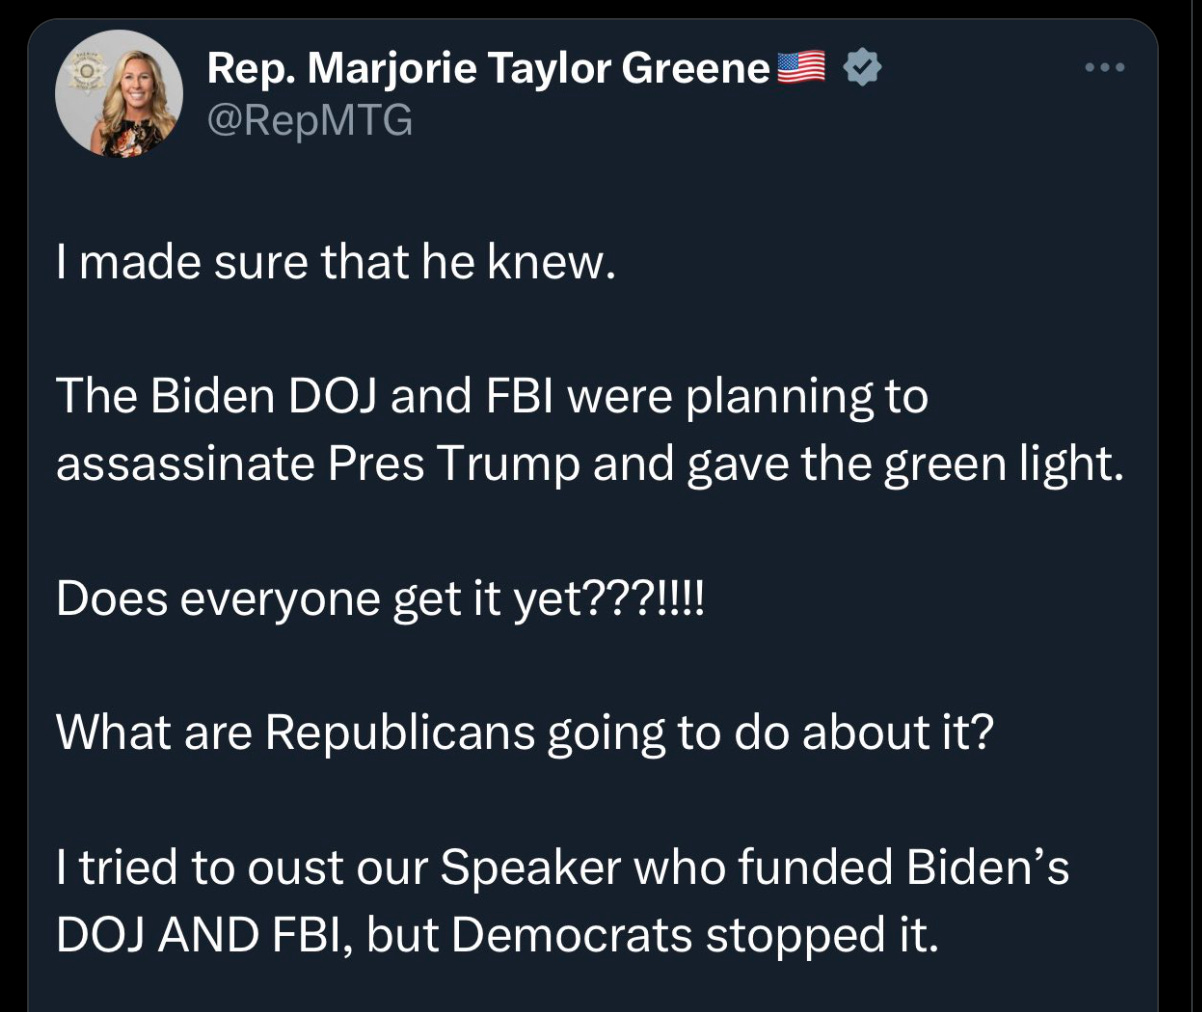 MTG tweet: “I made sure that he knew. The Biden DOJ and FBI were planning to assassinate Pres Trump and gave the green light. Does everyone get it yet???!!!! What are Republicans going to do about it? I tried to oust our Speaker who funded Biden’s DOJ AND FBI, but Democrats stopped it.”